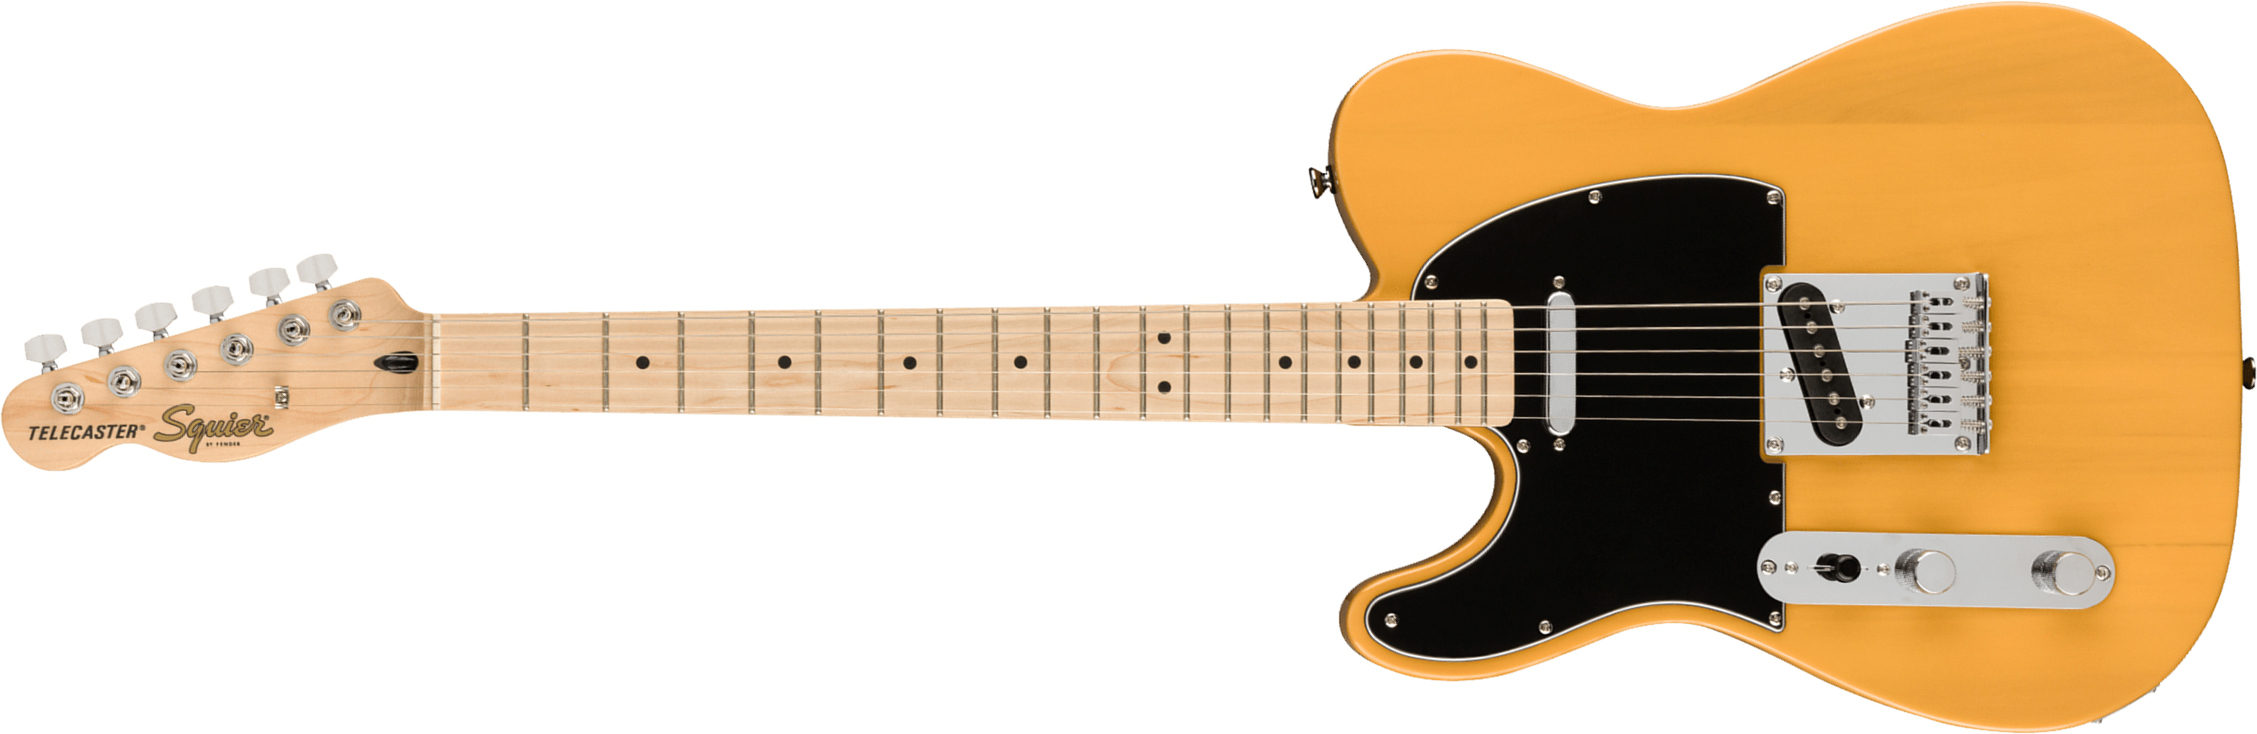 Squier Tele Affinity Gaucher 2021 2s Mn - Butterscotch Blonde - Left-handed electric guitar - Main picture